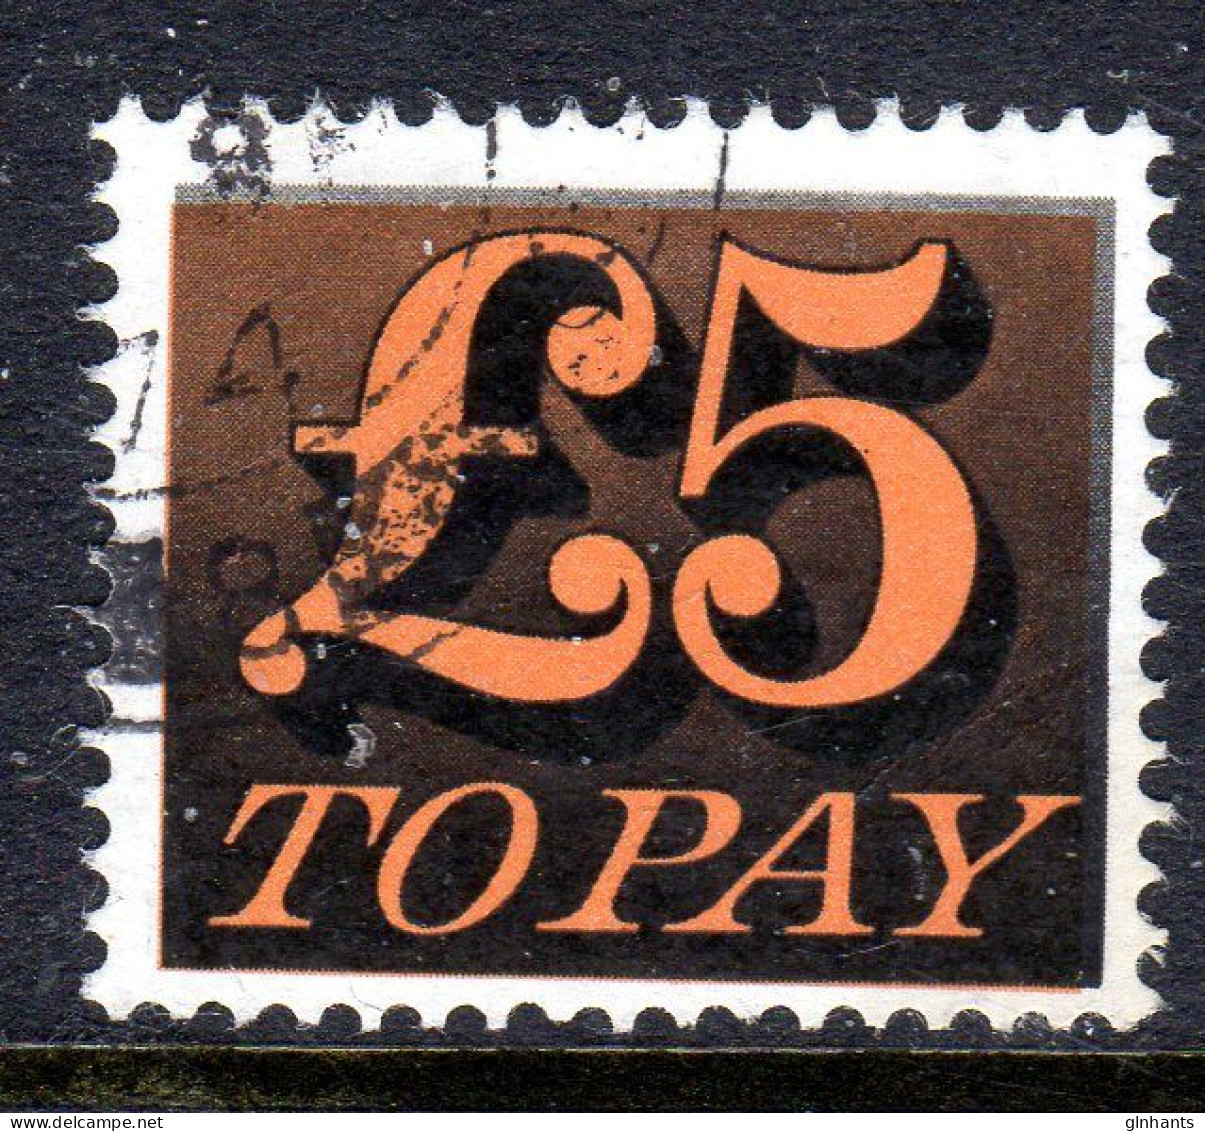 GREAT BRITAIN GB - 1970 POSTAGE DUE £5 STAMP FINE USED SG D89 - Postage Due